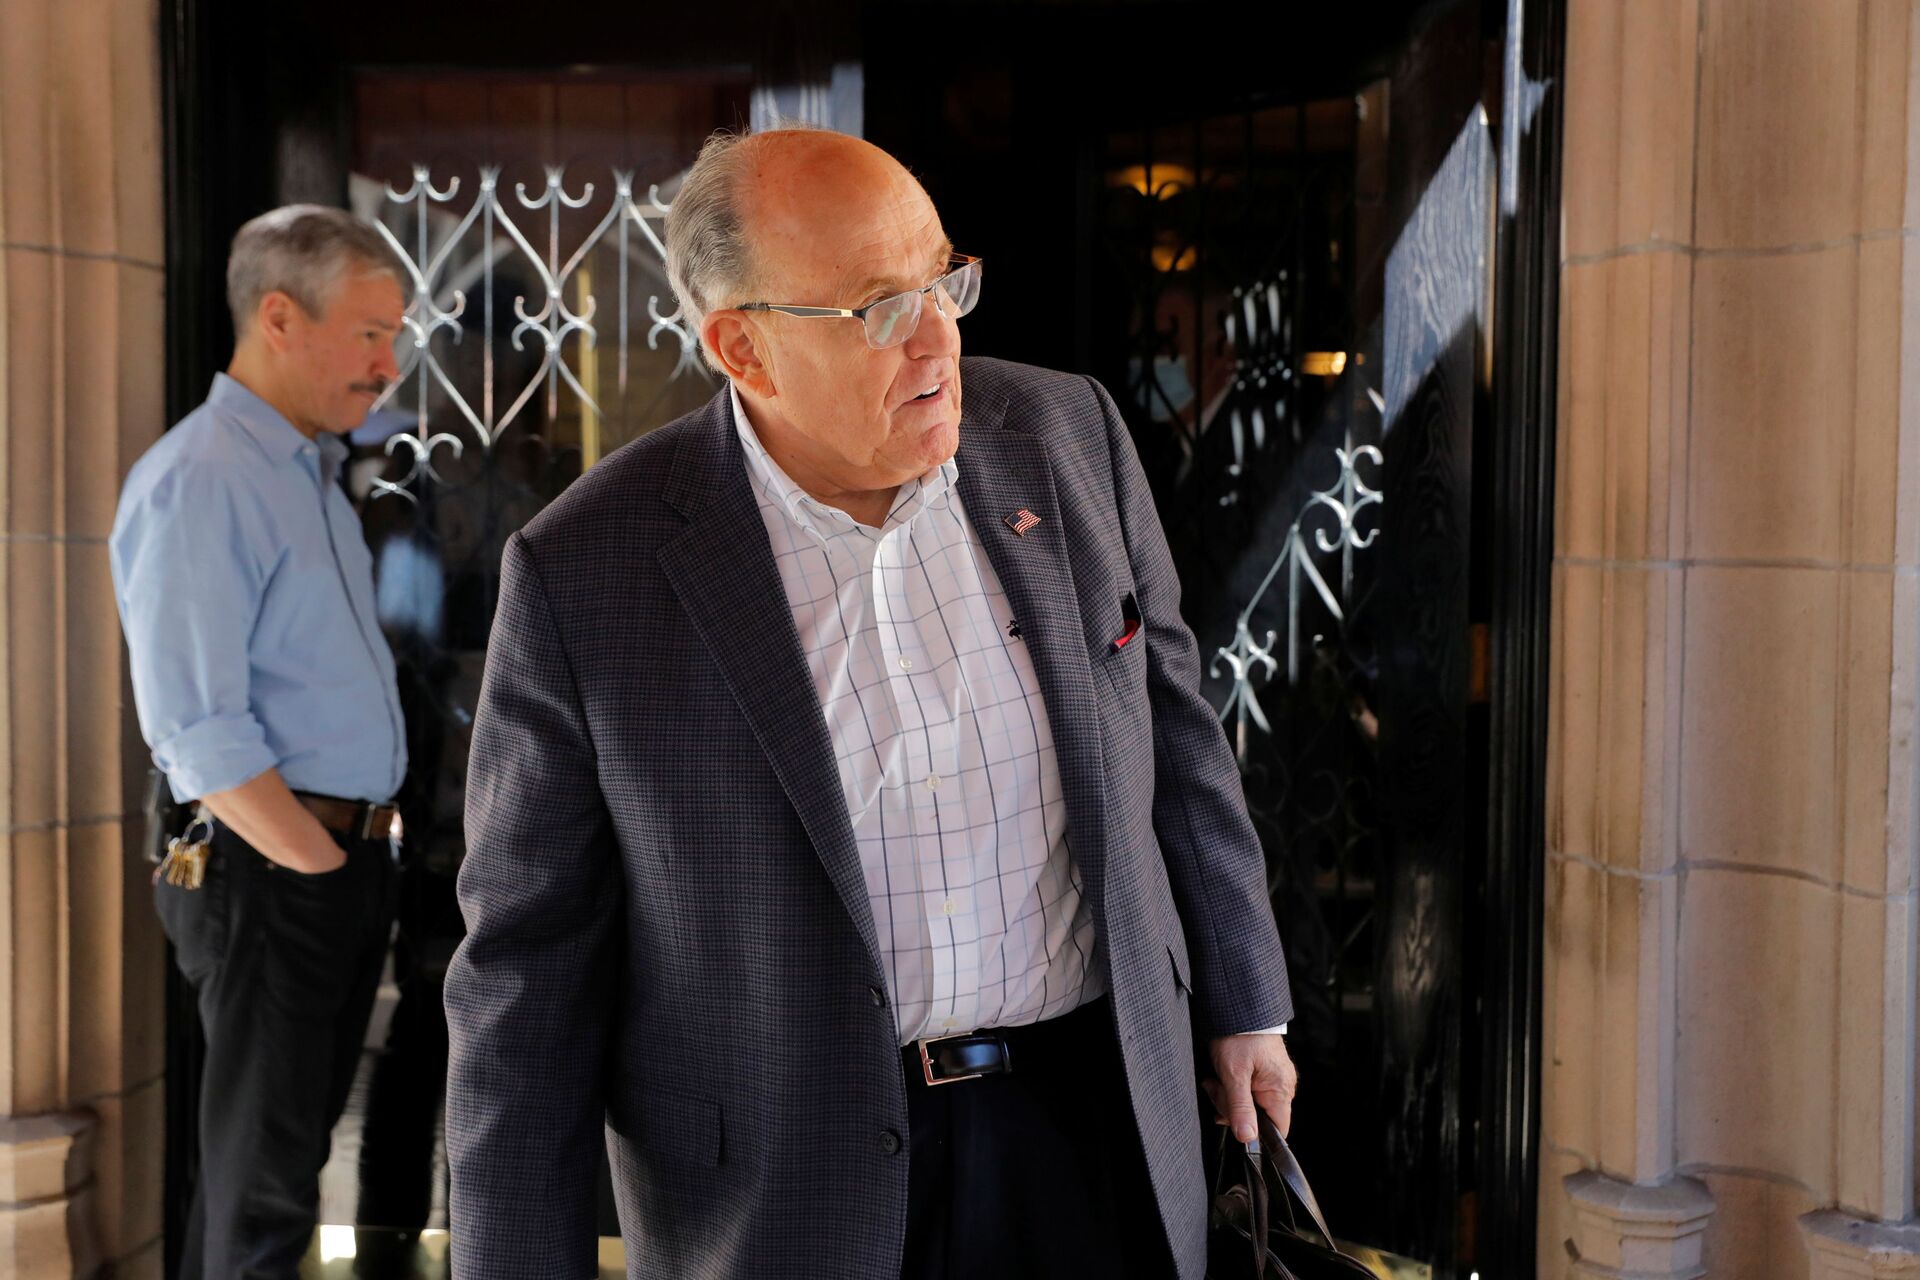 Former New York City Mayor Rudy Giuliani exits his apartment building after his law license was suspended in Manhattan in New York City, New York, U.S., June 24, 2021 - Sputnik International, 1920, 07.09.2021